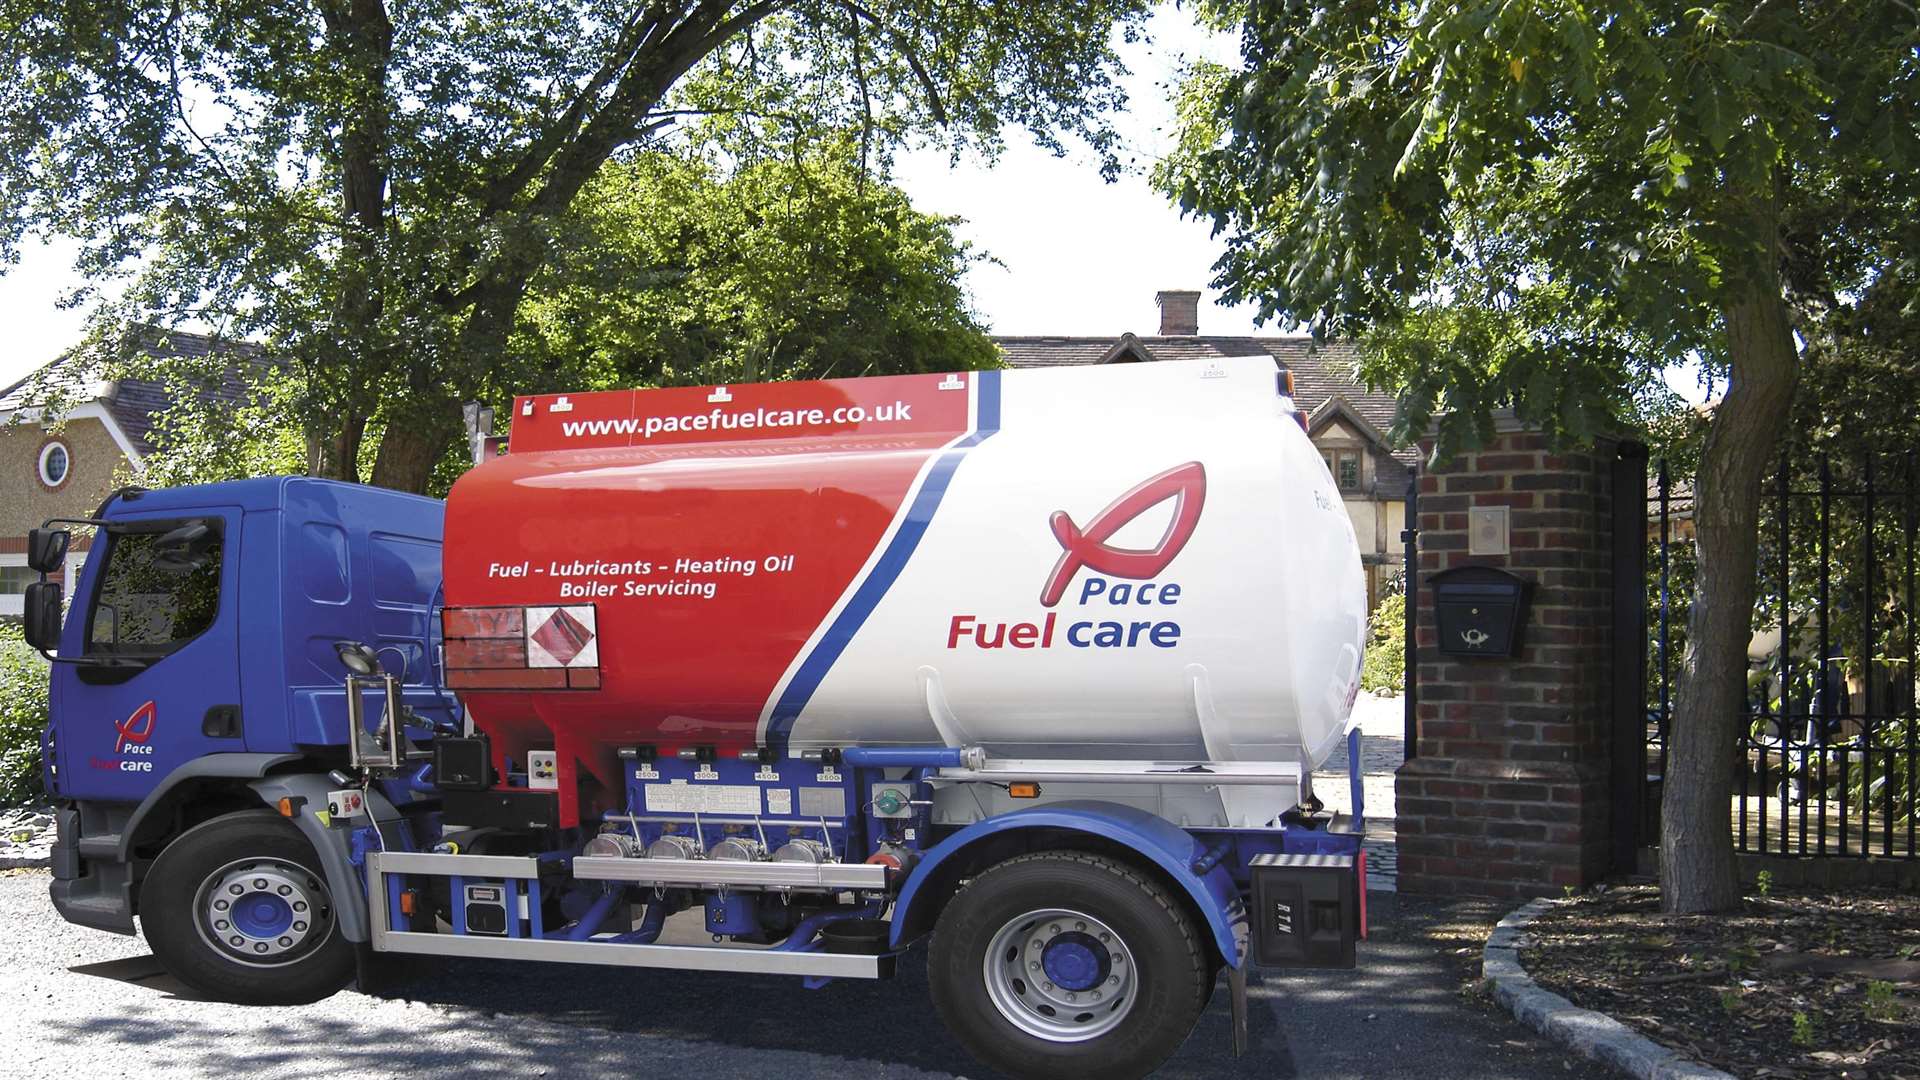 Pace Fuelcare is appealing for the help of Tunbridge Wells youngsters to come up with fun names to be printed on the tanker